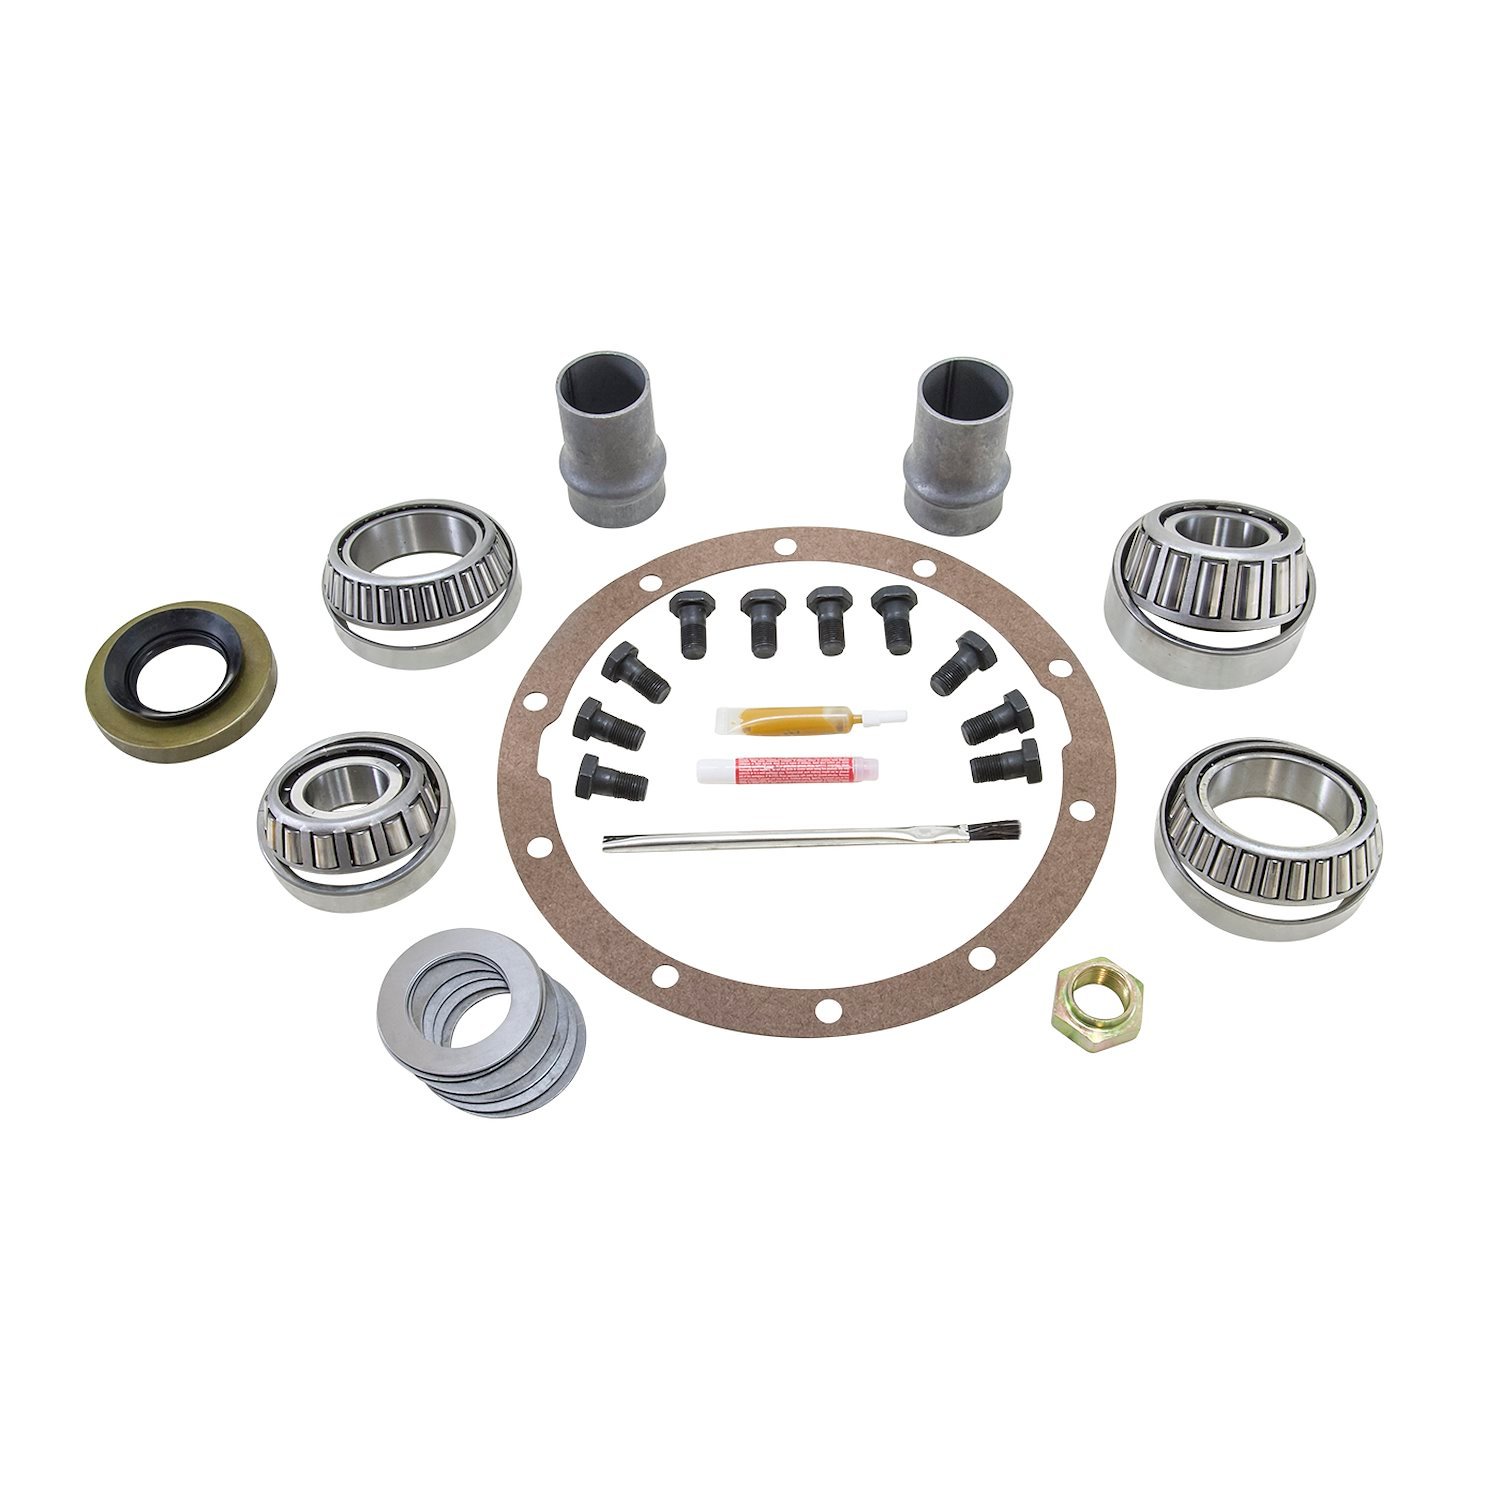 Master Overhaul Kit For 85 & Older 8 in. Toyota, 1-1/2 in. With Yzl, Arb And V6 Locker